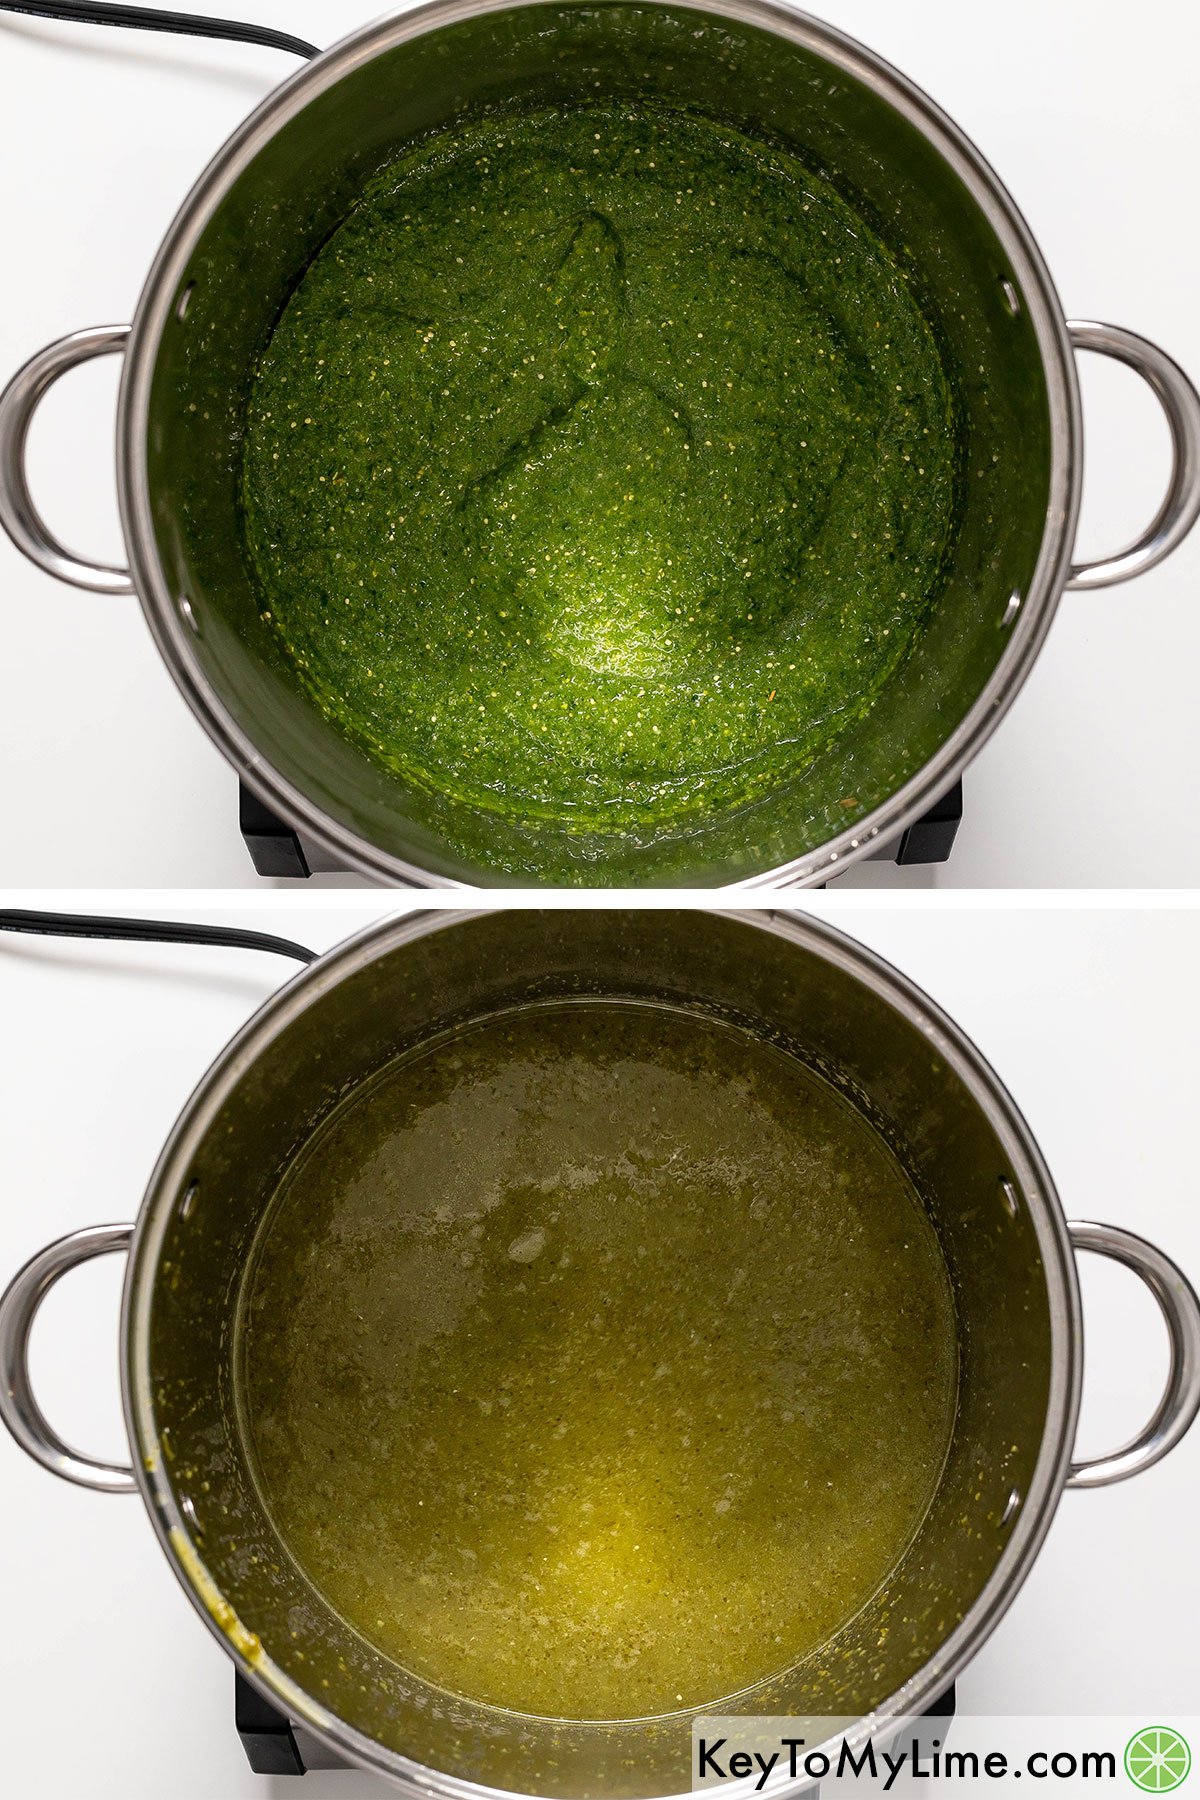 Sauteing a blended tomatillo mixture.